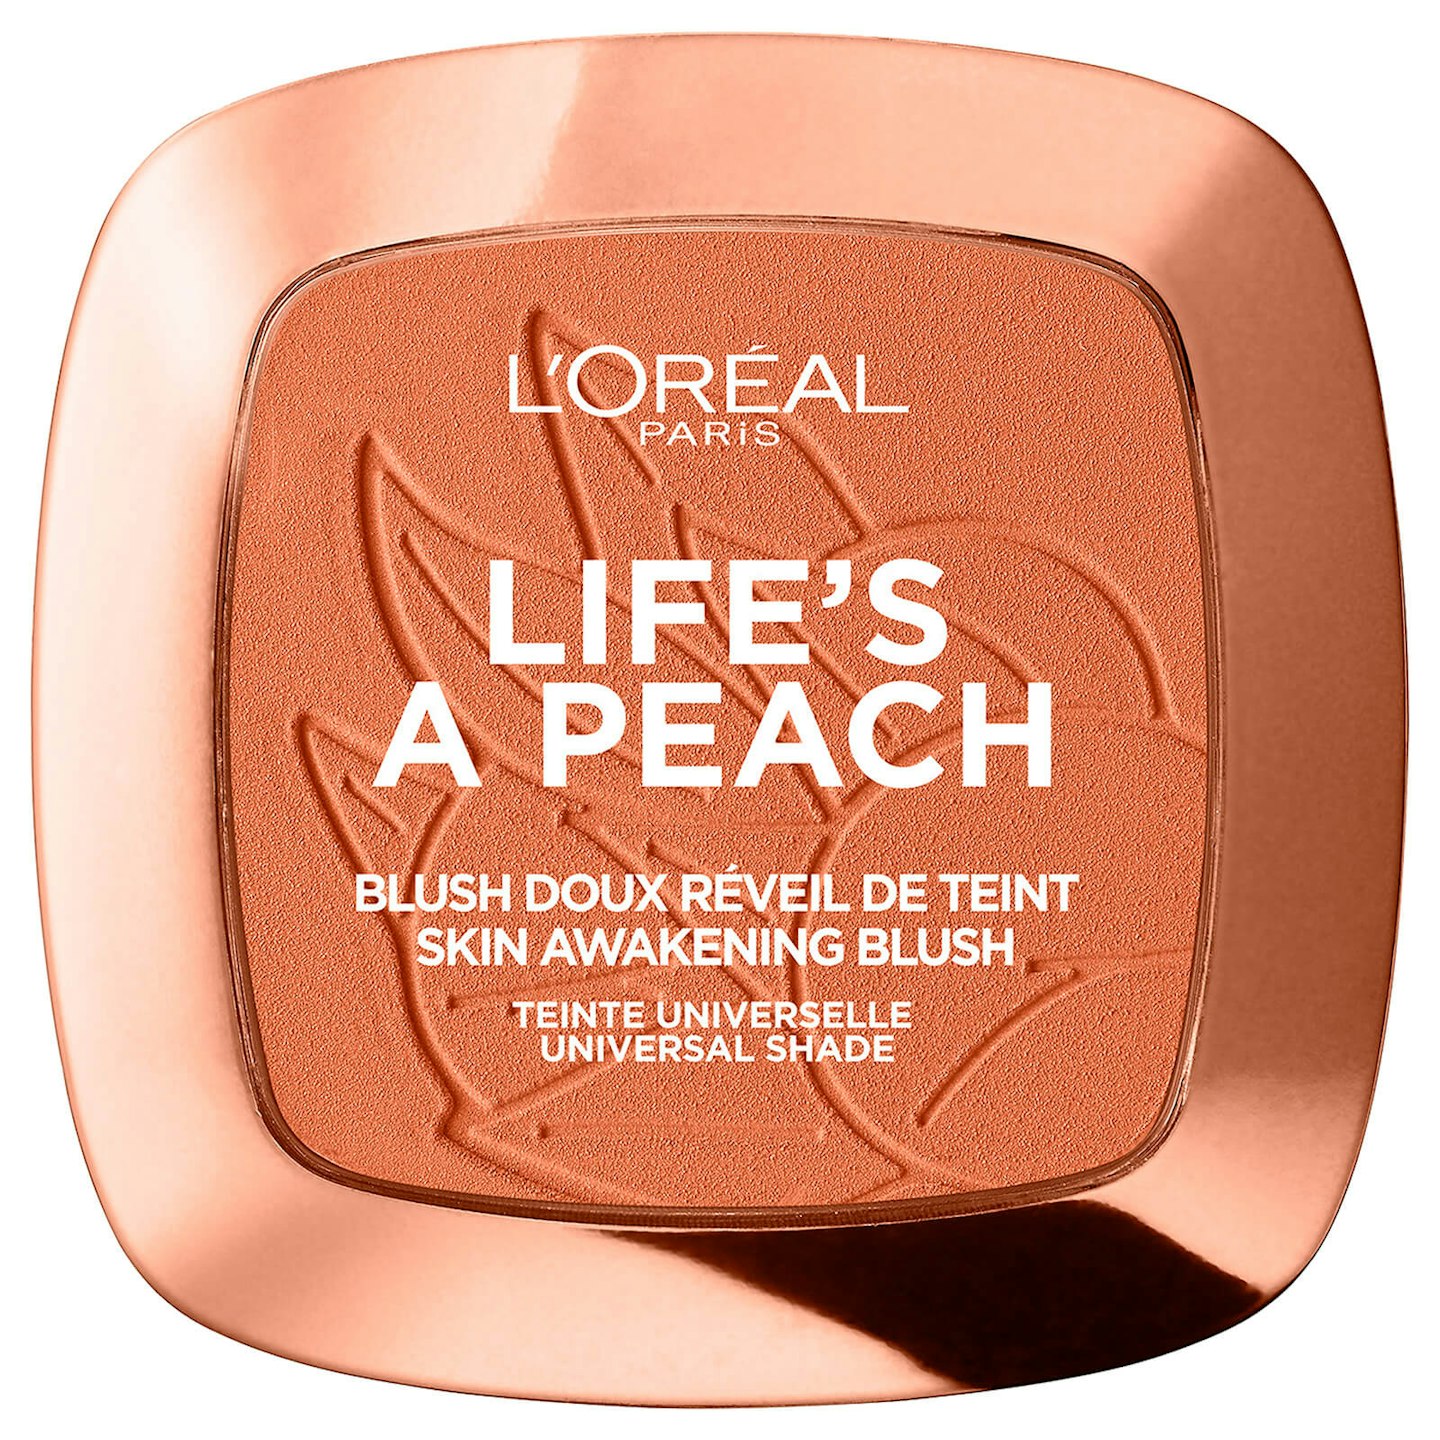 Description Add a flush of colour to your complexion with L'Oru00e9al Paris 'Life's a Peach' Blush Powder; a warm, universal shade to suit all skin tones. Blending seamlessly onto skin, the peach-scented, high-pigmented blusher delivers a veil of natural-looking colour to lend the cheeks a radiant glow. Build lightly until your desired look is achieved.   Product Details Brand: L'Oru00e9al Paris Range: Woke up Like This Directions: For a natural flush of colour, apply the blush on the apple of the cheeks, blending outwards. Build up with light layers until the desired shade of peach is achieved. For a sculpted look, use after bronzing powder and blend up along the cheekbone.  Ingredients: Talc, Synthetic Fluorphlogopite, Mica, Cocos Nucifera Oil / Coconut Oil, Zea Mays Starch / Corn Starch, Magnesium Stearate, Ci 77891 / Titanium Dioxide, Ci 77491 / Iron Oxides, Caprylyl Glycol, Ci 75470 / Carmine, Mangifera Indica Seed Butter / Mango Seed Butter, Theobroma Cacao Seed Butter / Cocoa Seed Butter, Prunus Persica Kernel Oil / Peach Kernel Oil, Parfum / Fragrance, Benzyl Alcohol.  Volume: 9g L'Oru00e9al Paris L'Oru00e9al Paris Blush Powder , £6.29